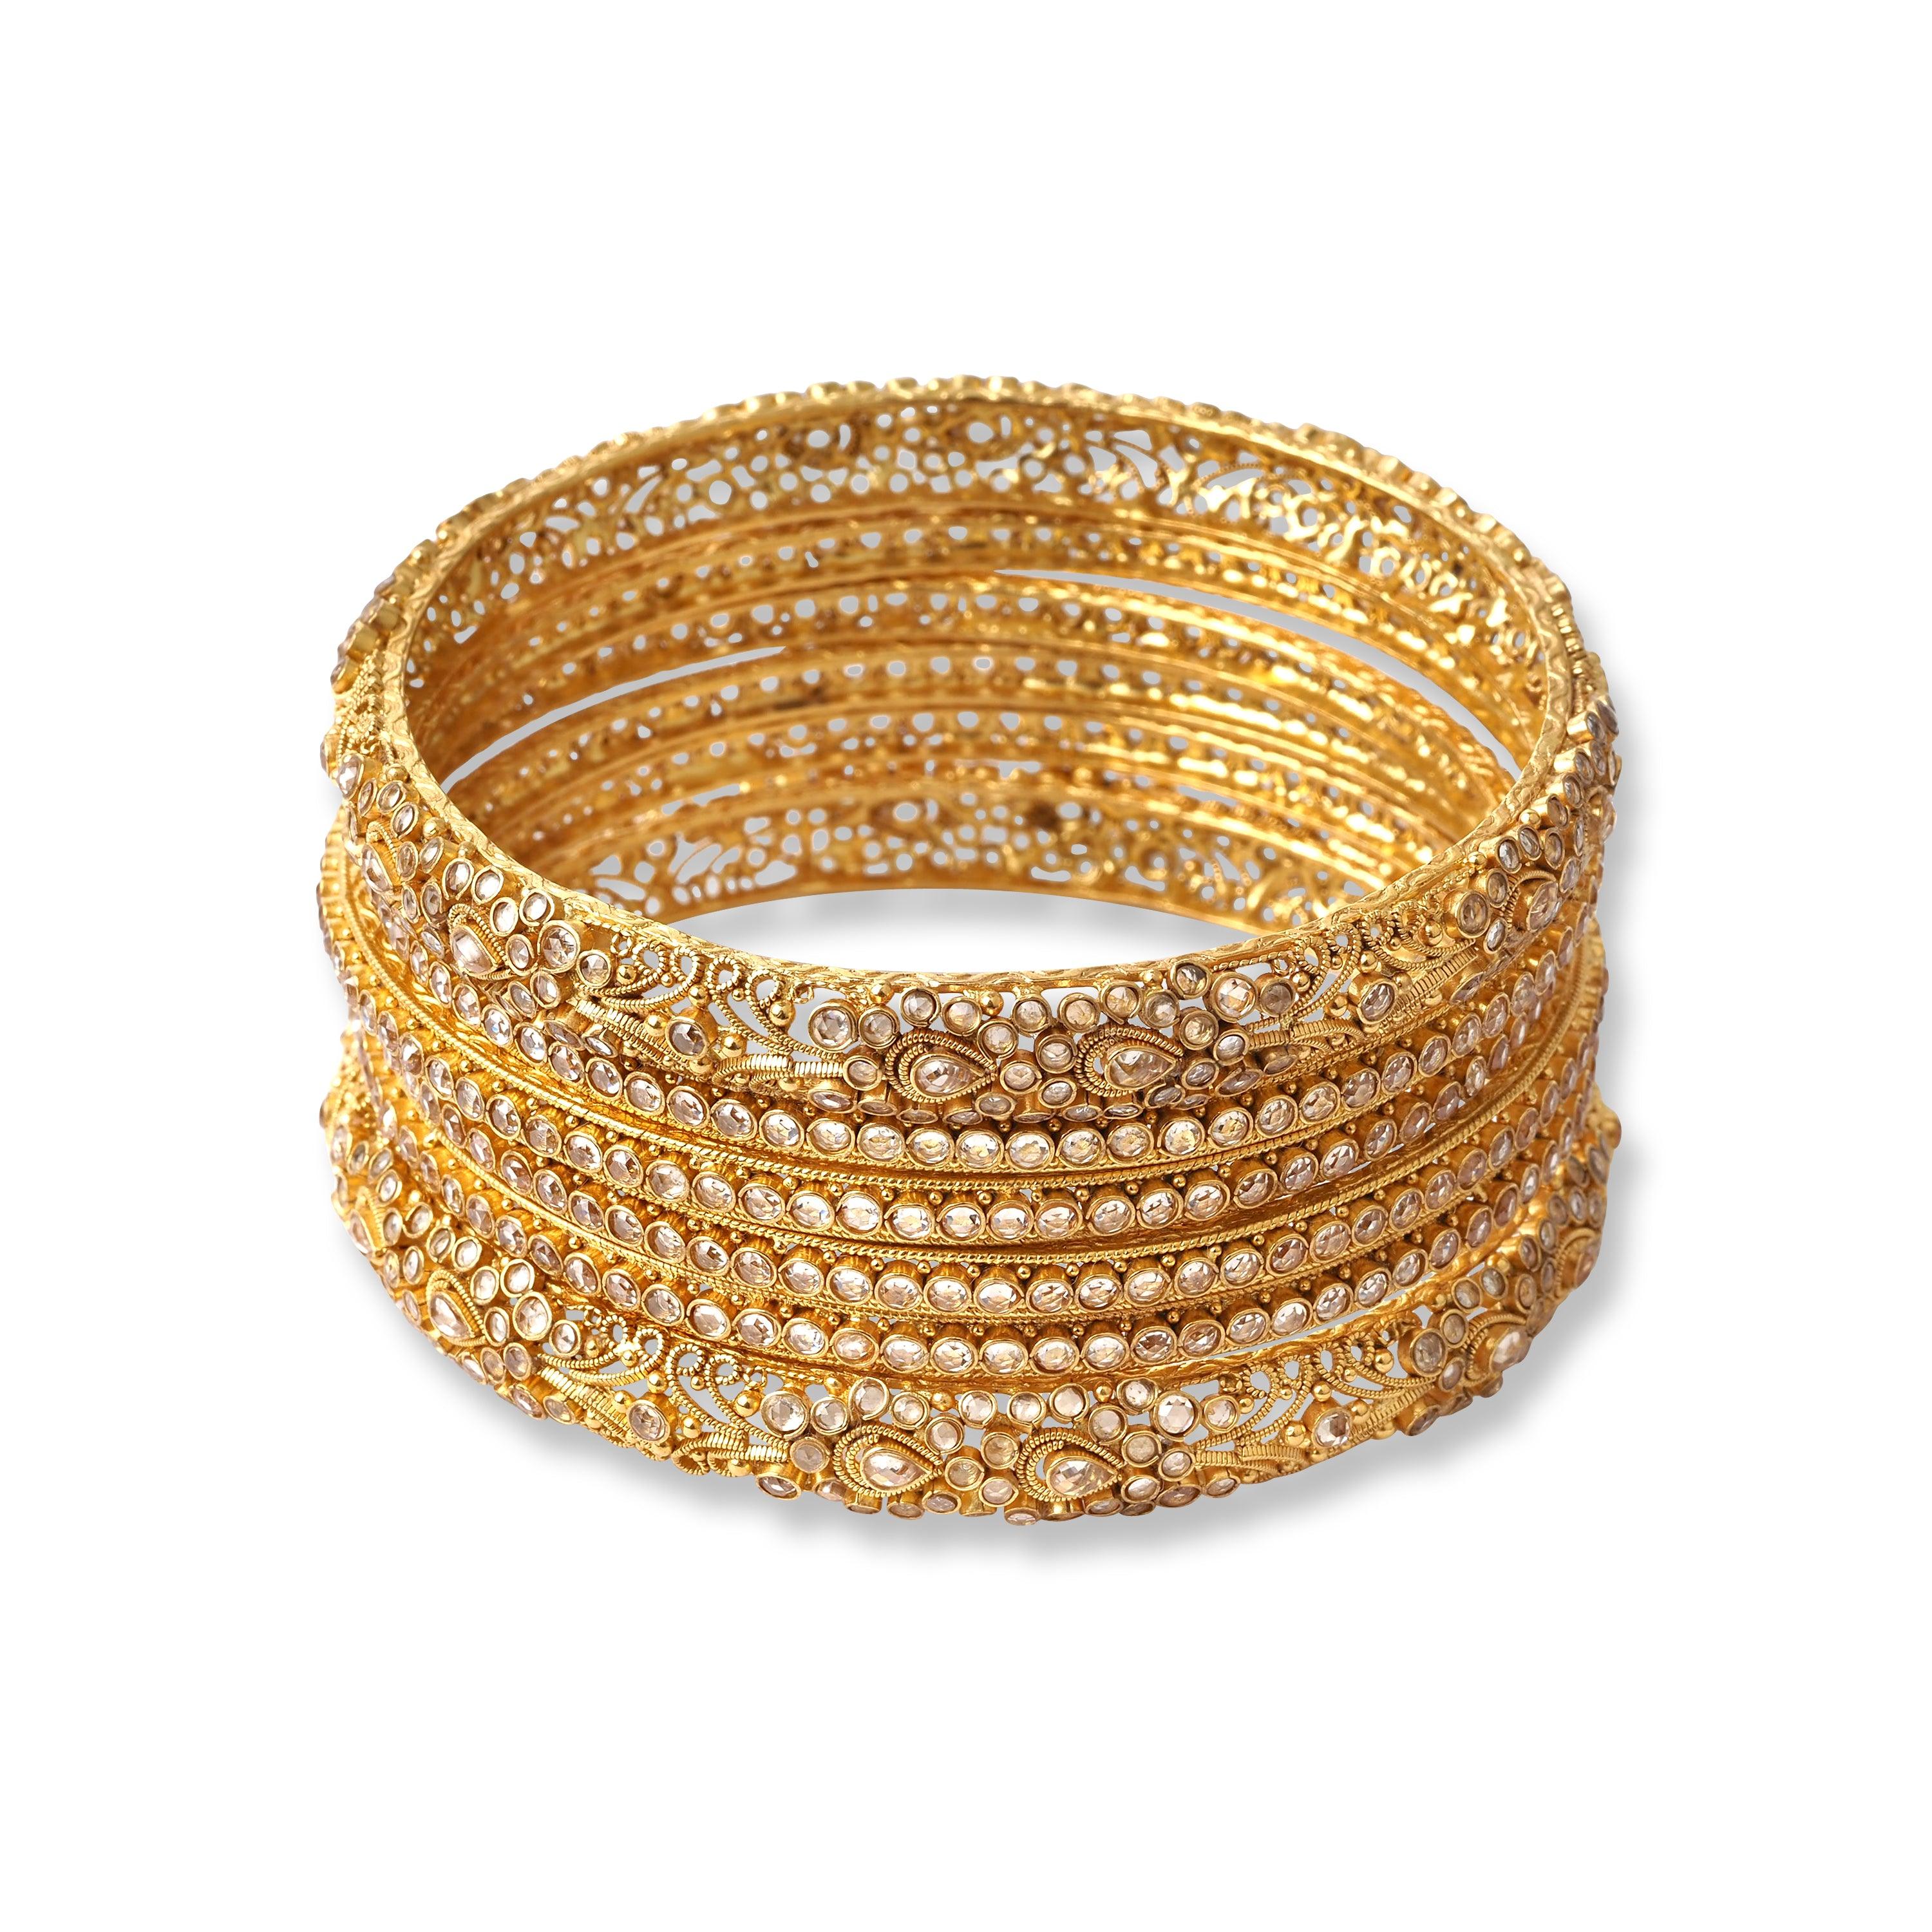 22ct Gold Antiquated Look Bangles with Comfort Fit (111.6g) B-8280 - Minar Jewellers